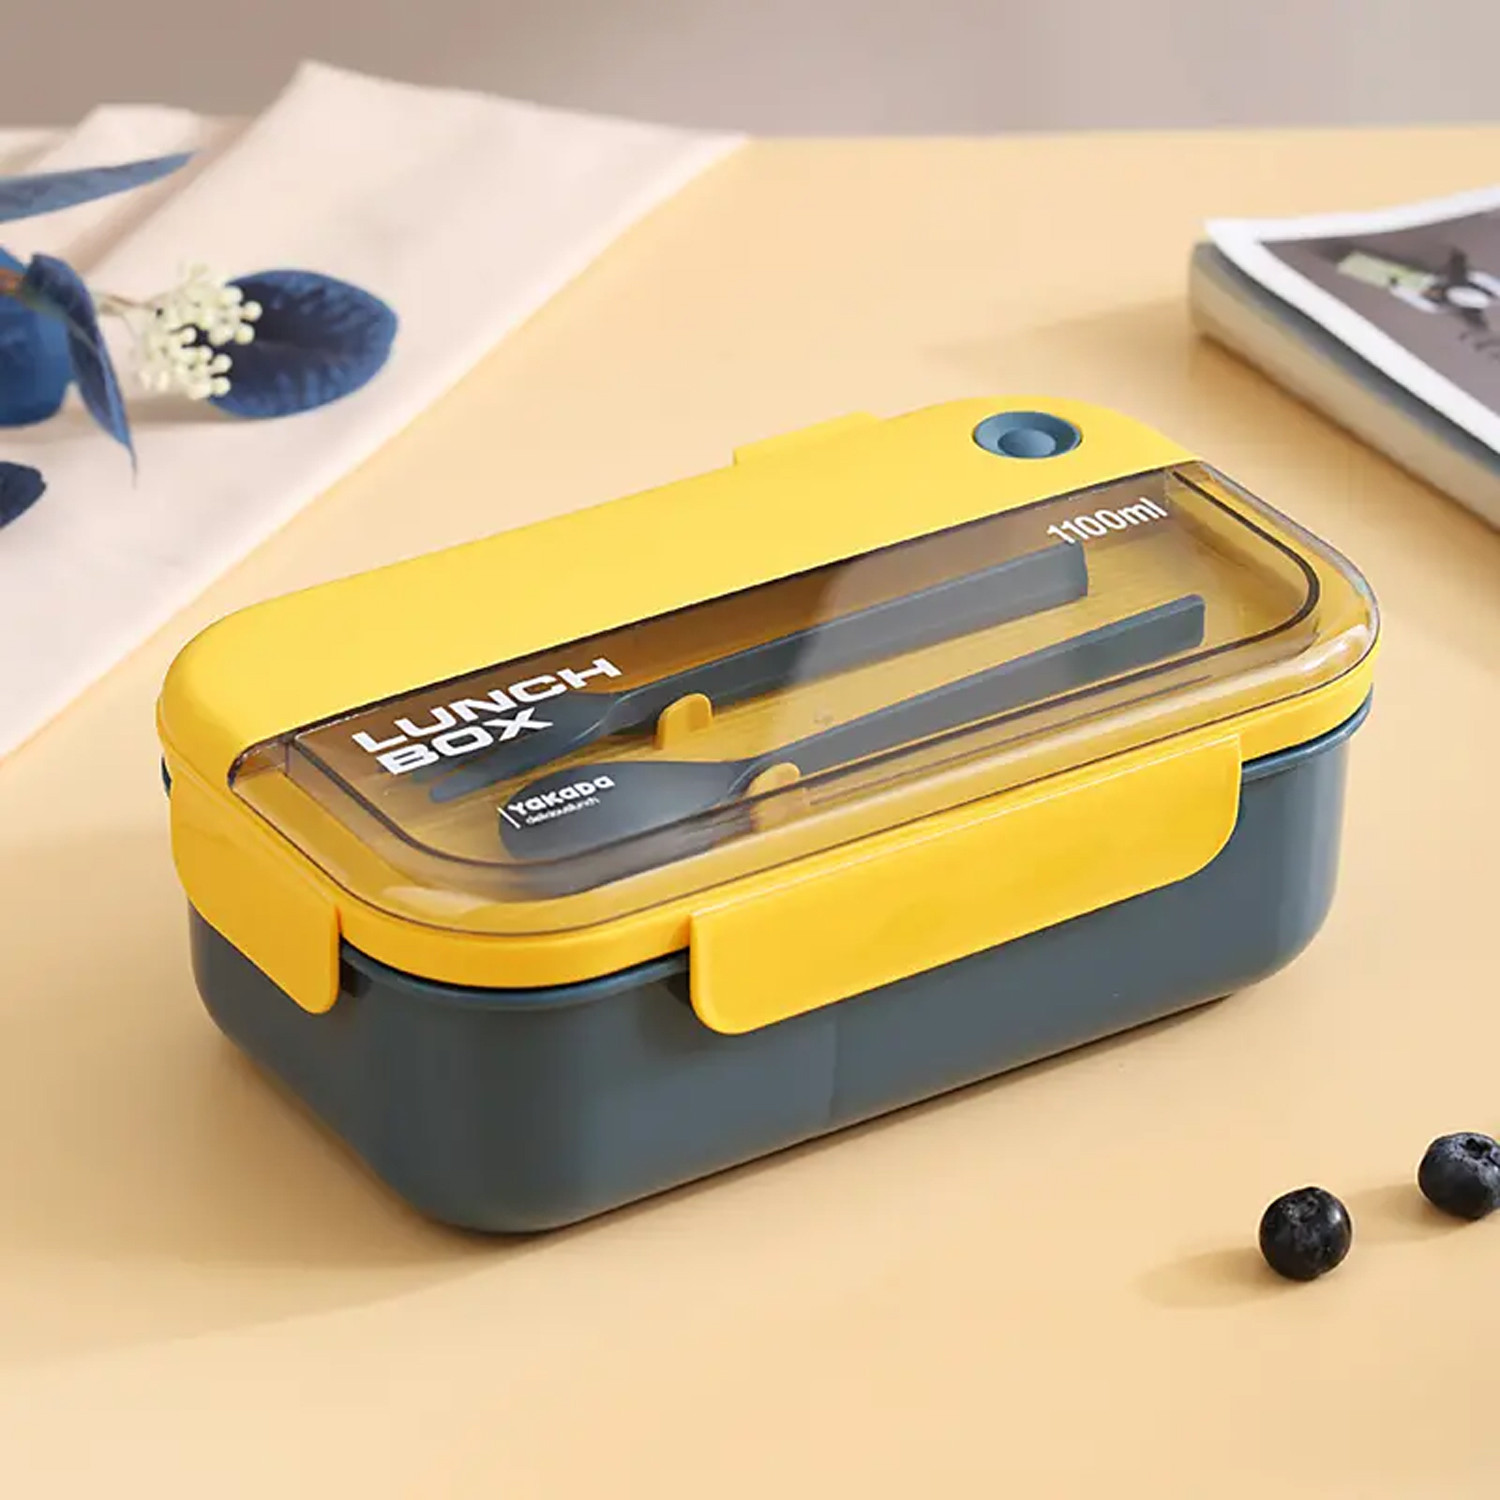 Kuber Industries Insulated Lunch Box For Kids & Adults|Premium Food-Grade PP Plastic|Leakproof & Spill Proof|Dishwasher & Microwave Safe Lunch Box|1100 ML|HX0043128|Yellow & Blue